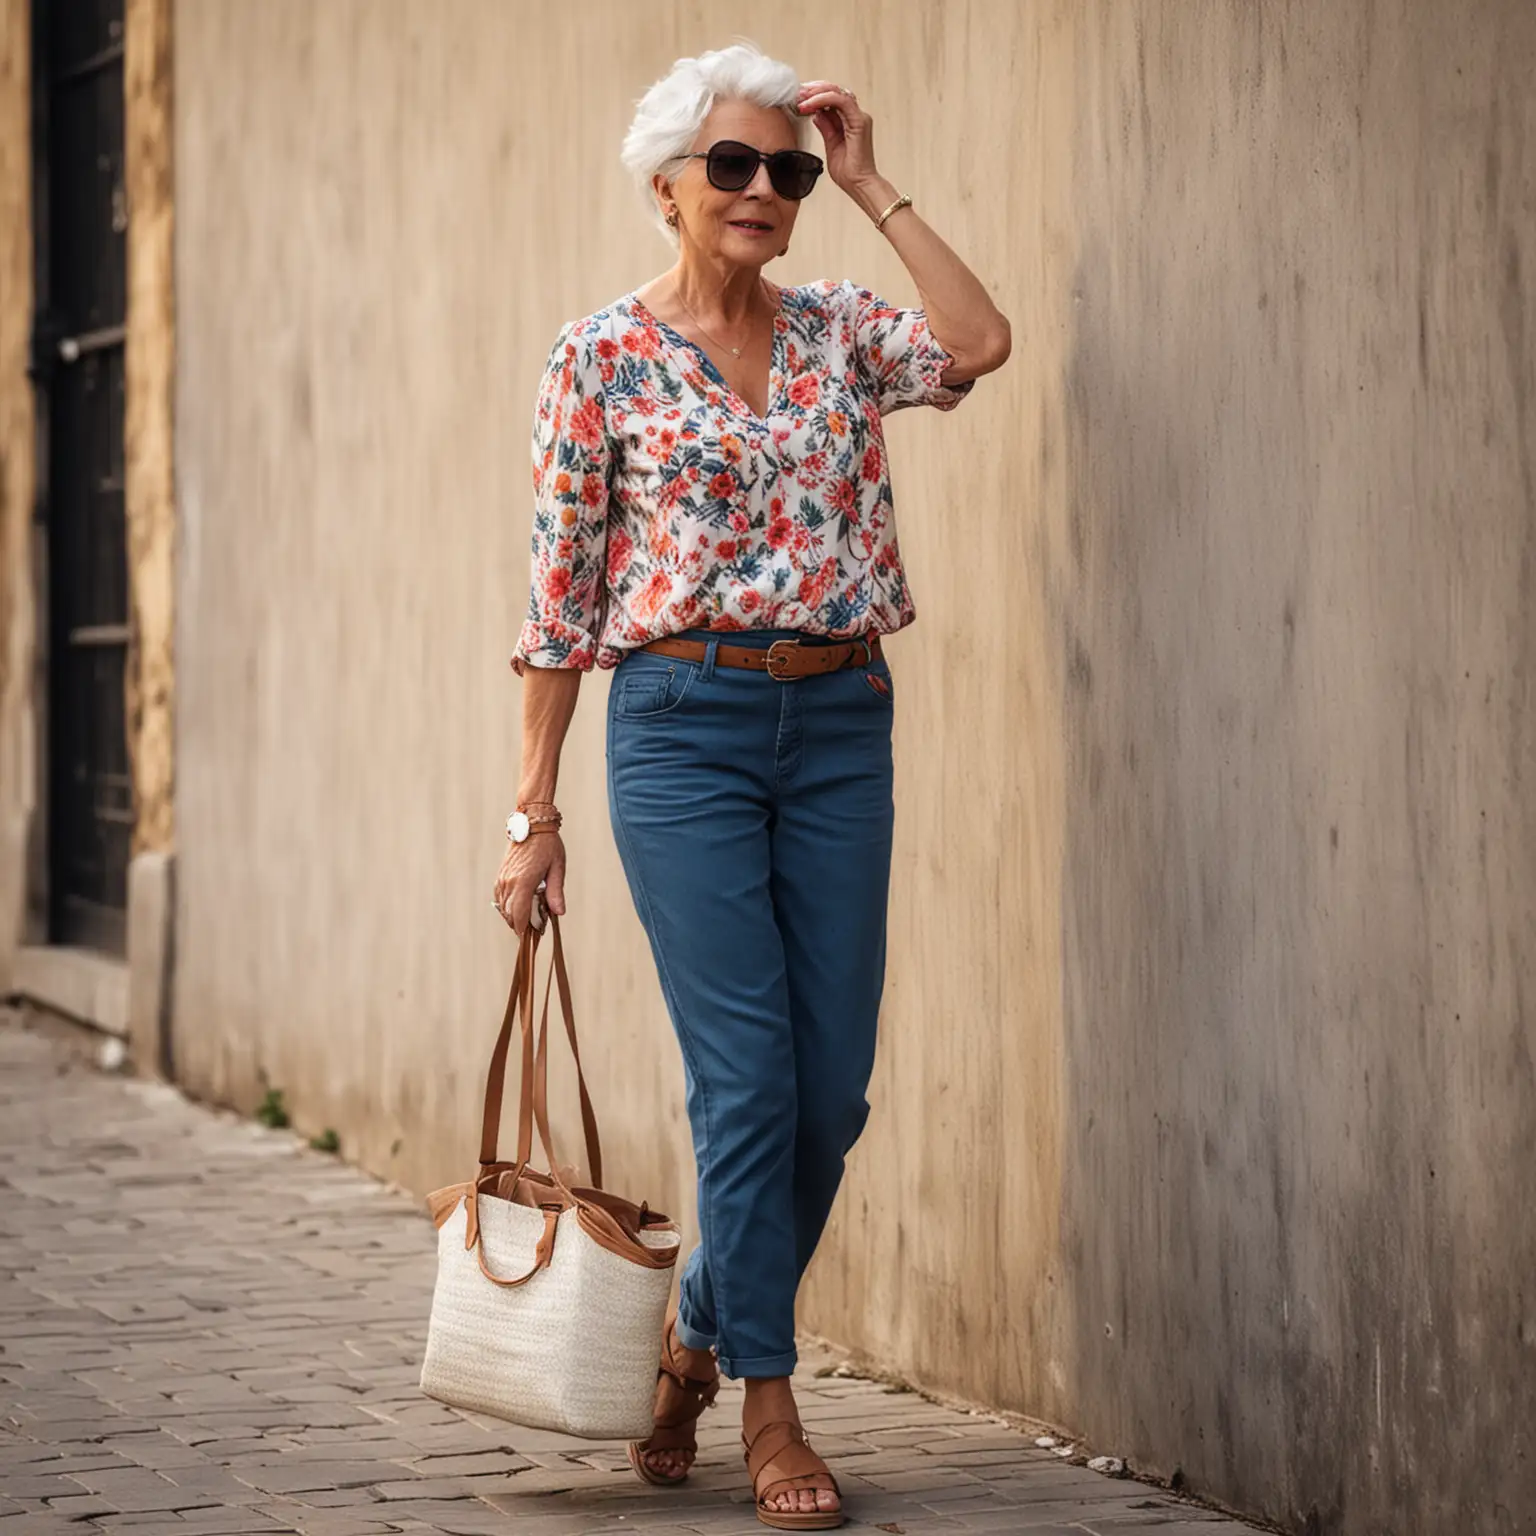 Chic Summer Fashion for Stylish Women Over 50